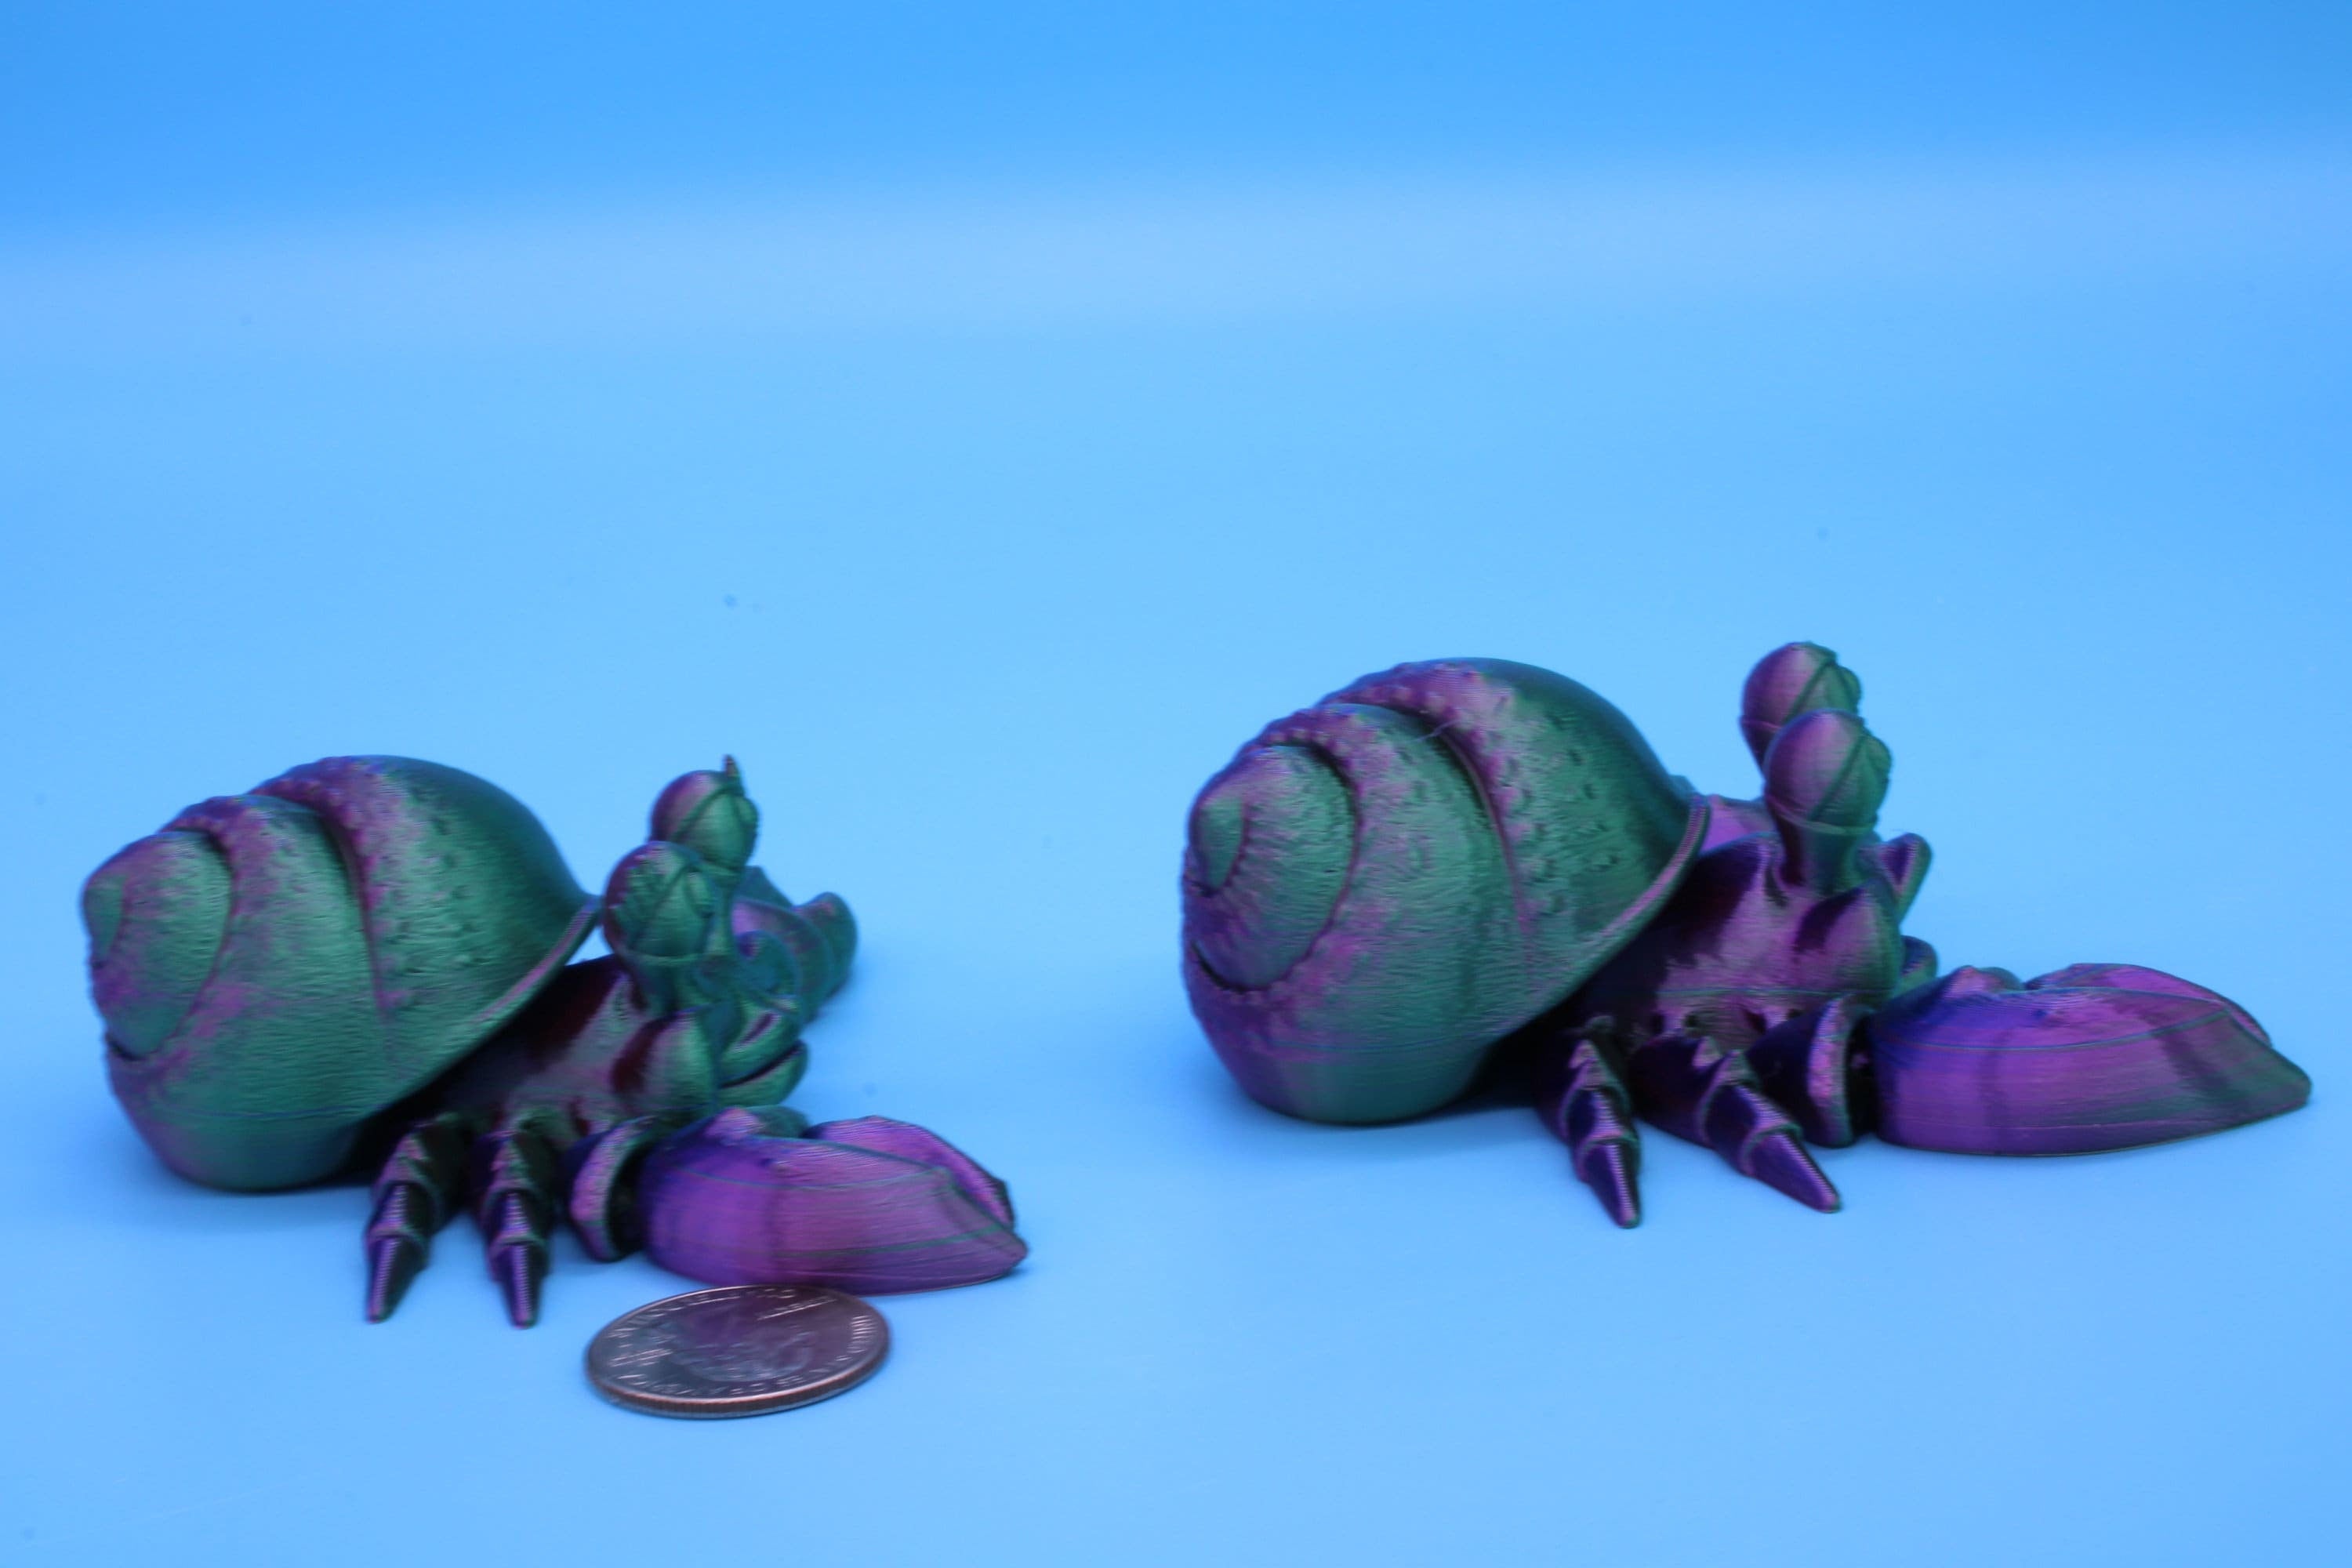 Articulating Multi Color Flexi Hermit Crab Mr. & Mrs. 3D Printed. Super cute, friendly crabs. Great fidget toy, buddy, Sensory toy for all.